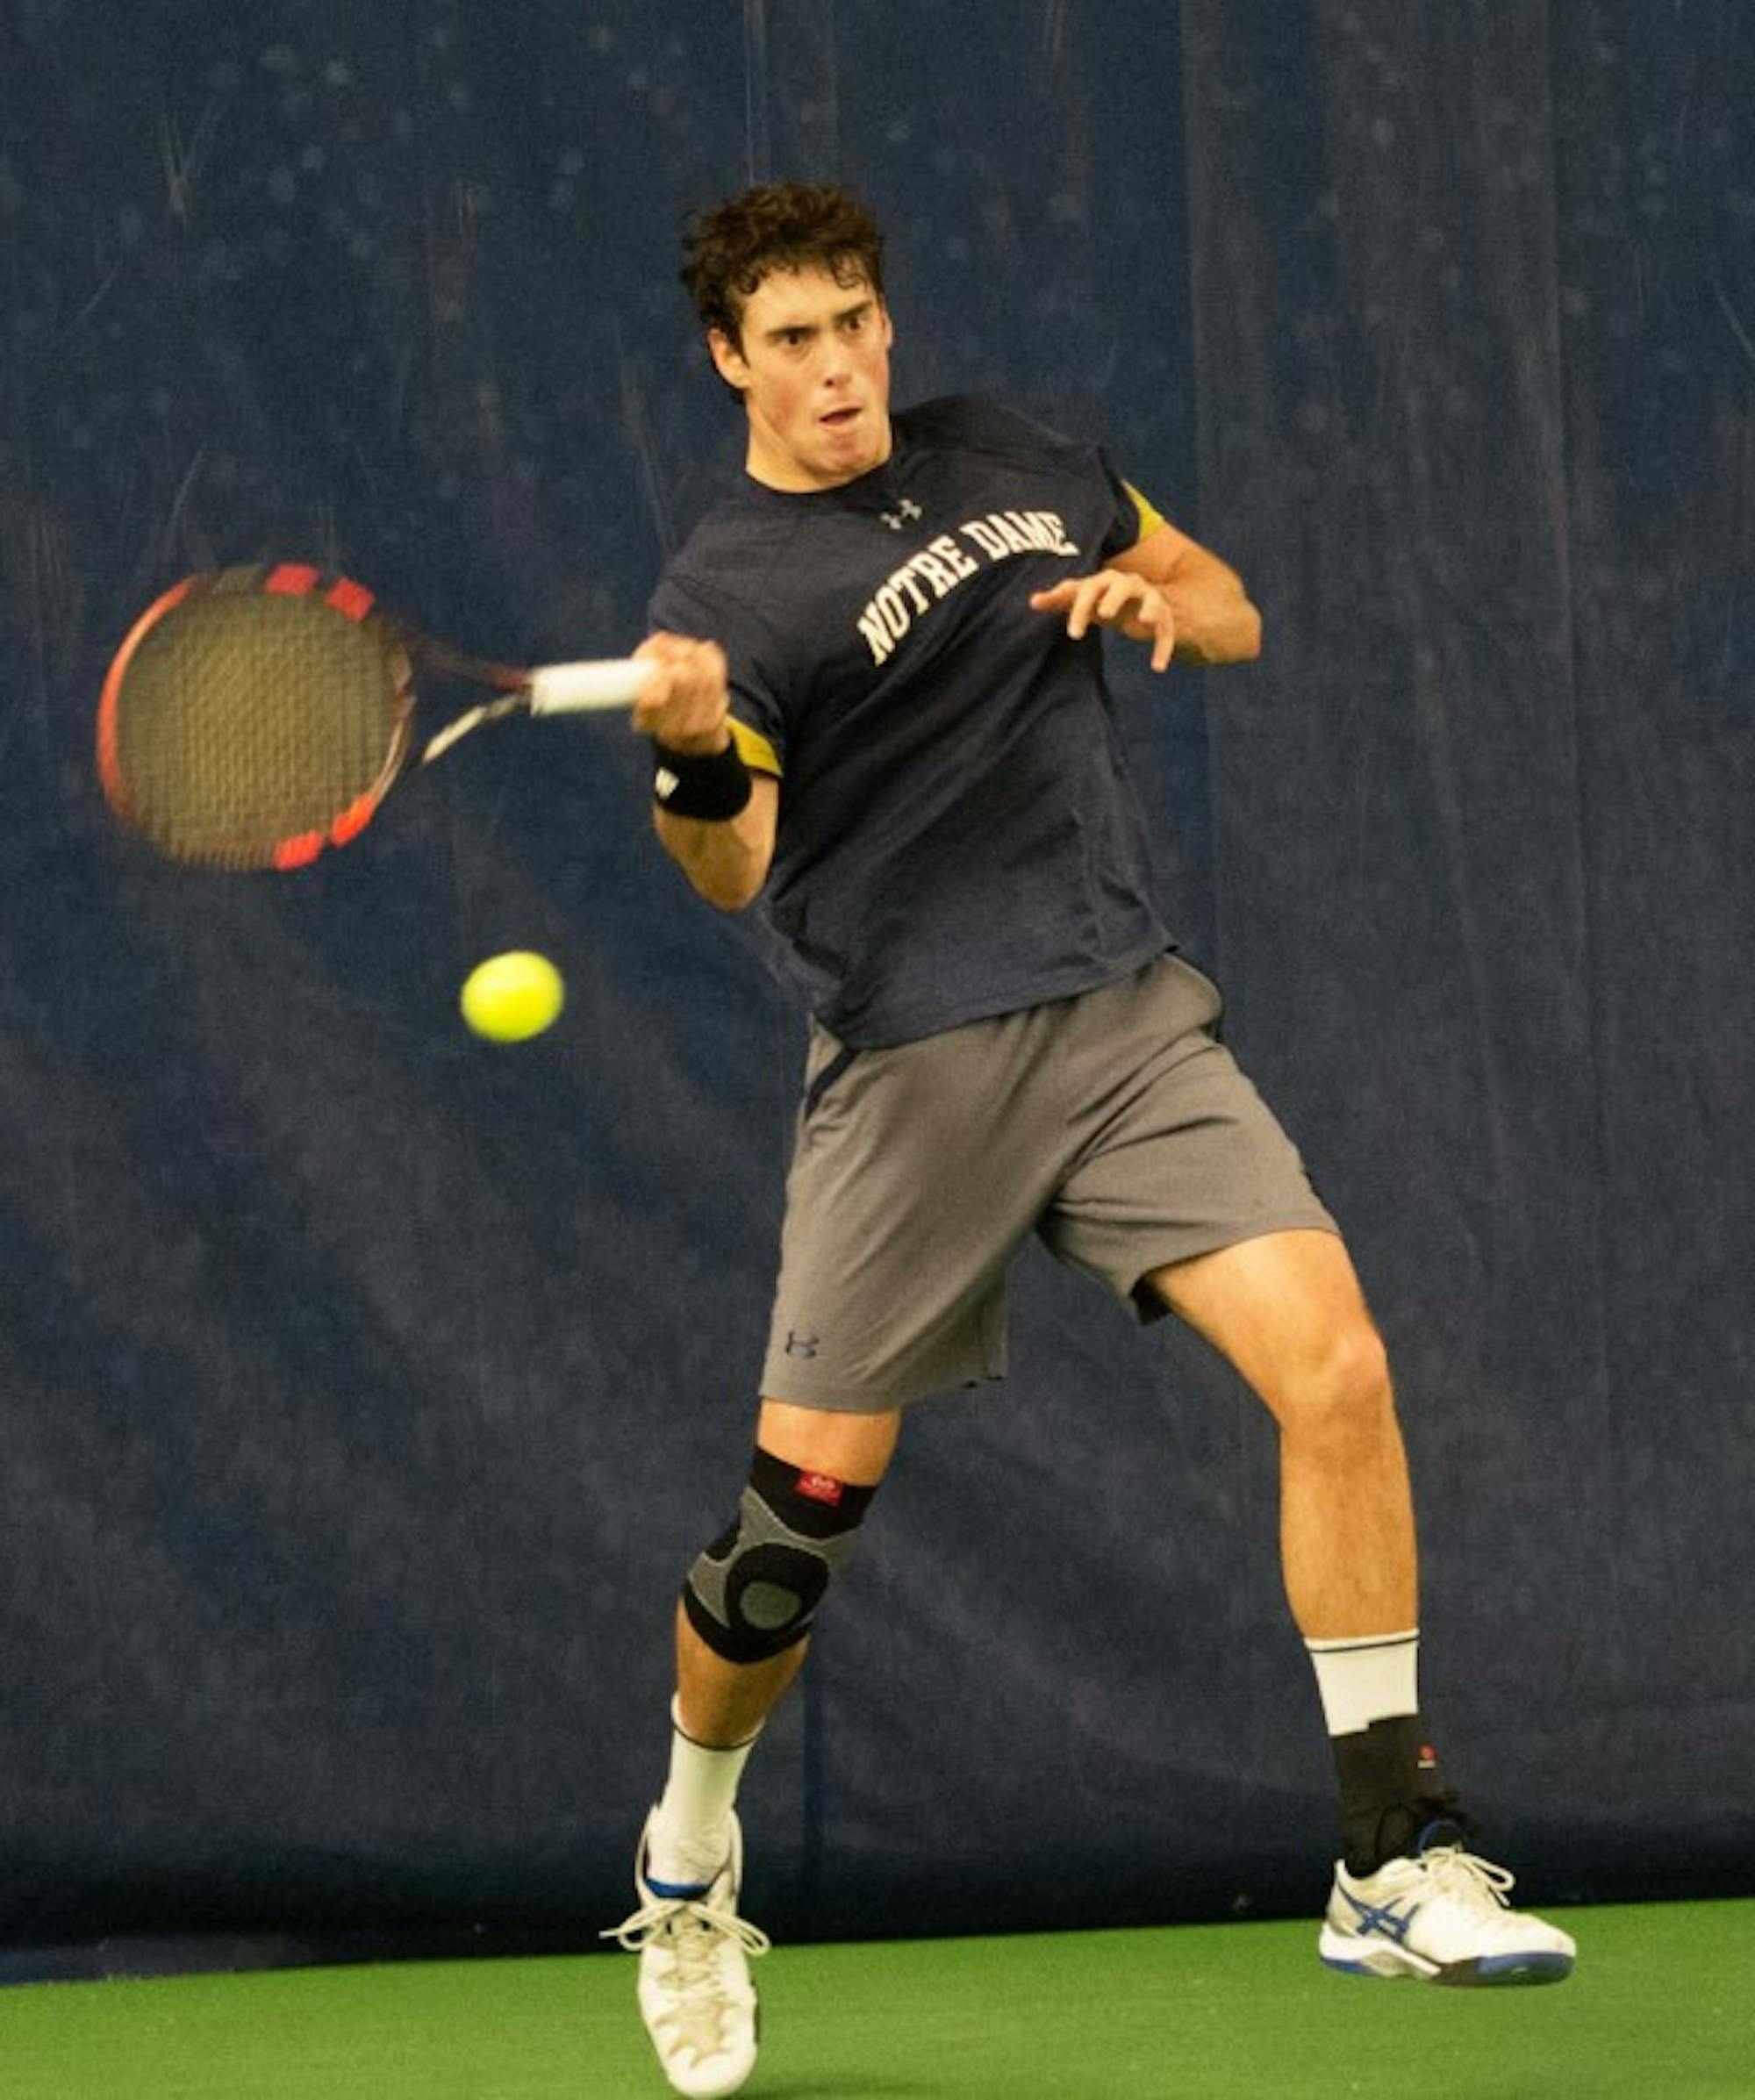 Irish junior Alex Lebedev hits a forehand during Notre Dame’s 4-1 victory over Northwestern on Feb. 24. Lebedev lost his singles match but won his doubles match with his partner, sophomore Matt Gamble.